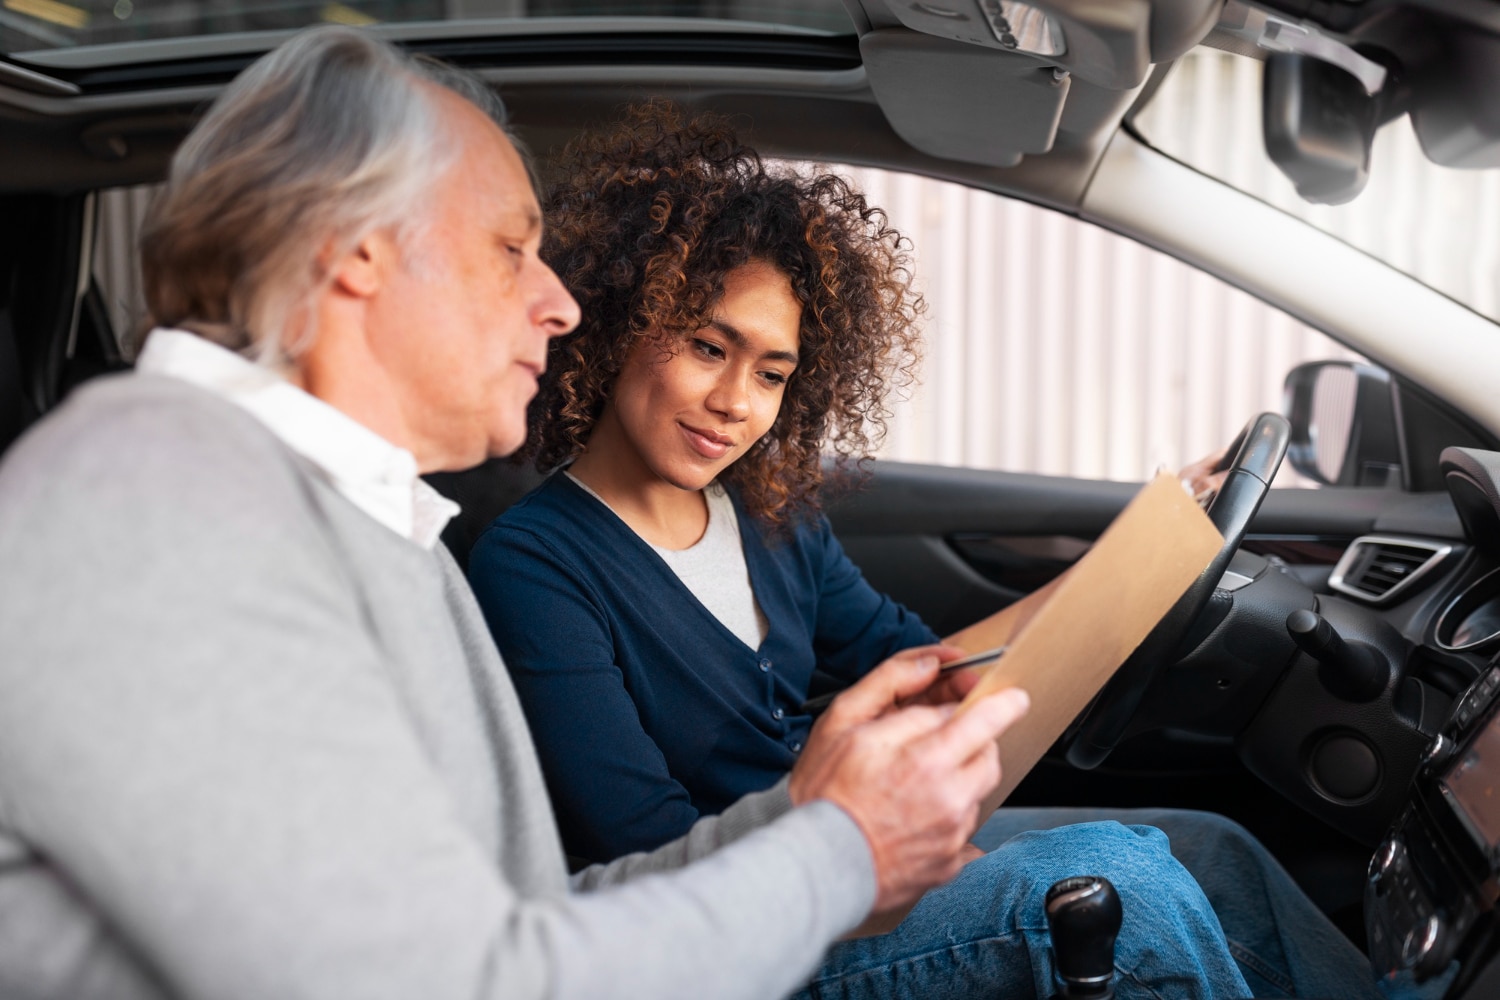 Clearing Your Insurance Record After an At-Fault Car Accident in Texas